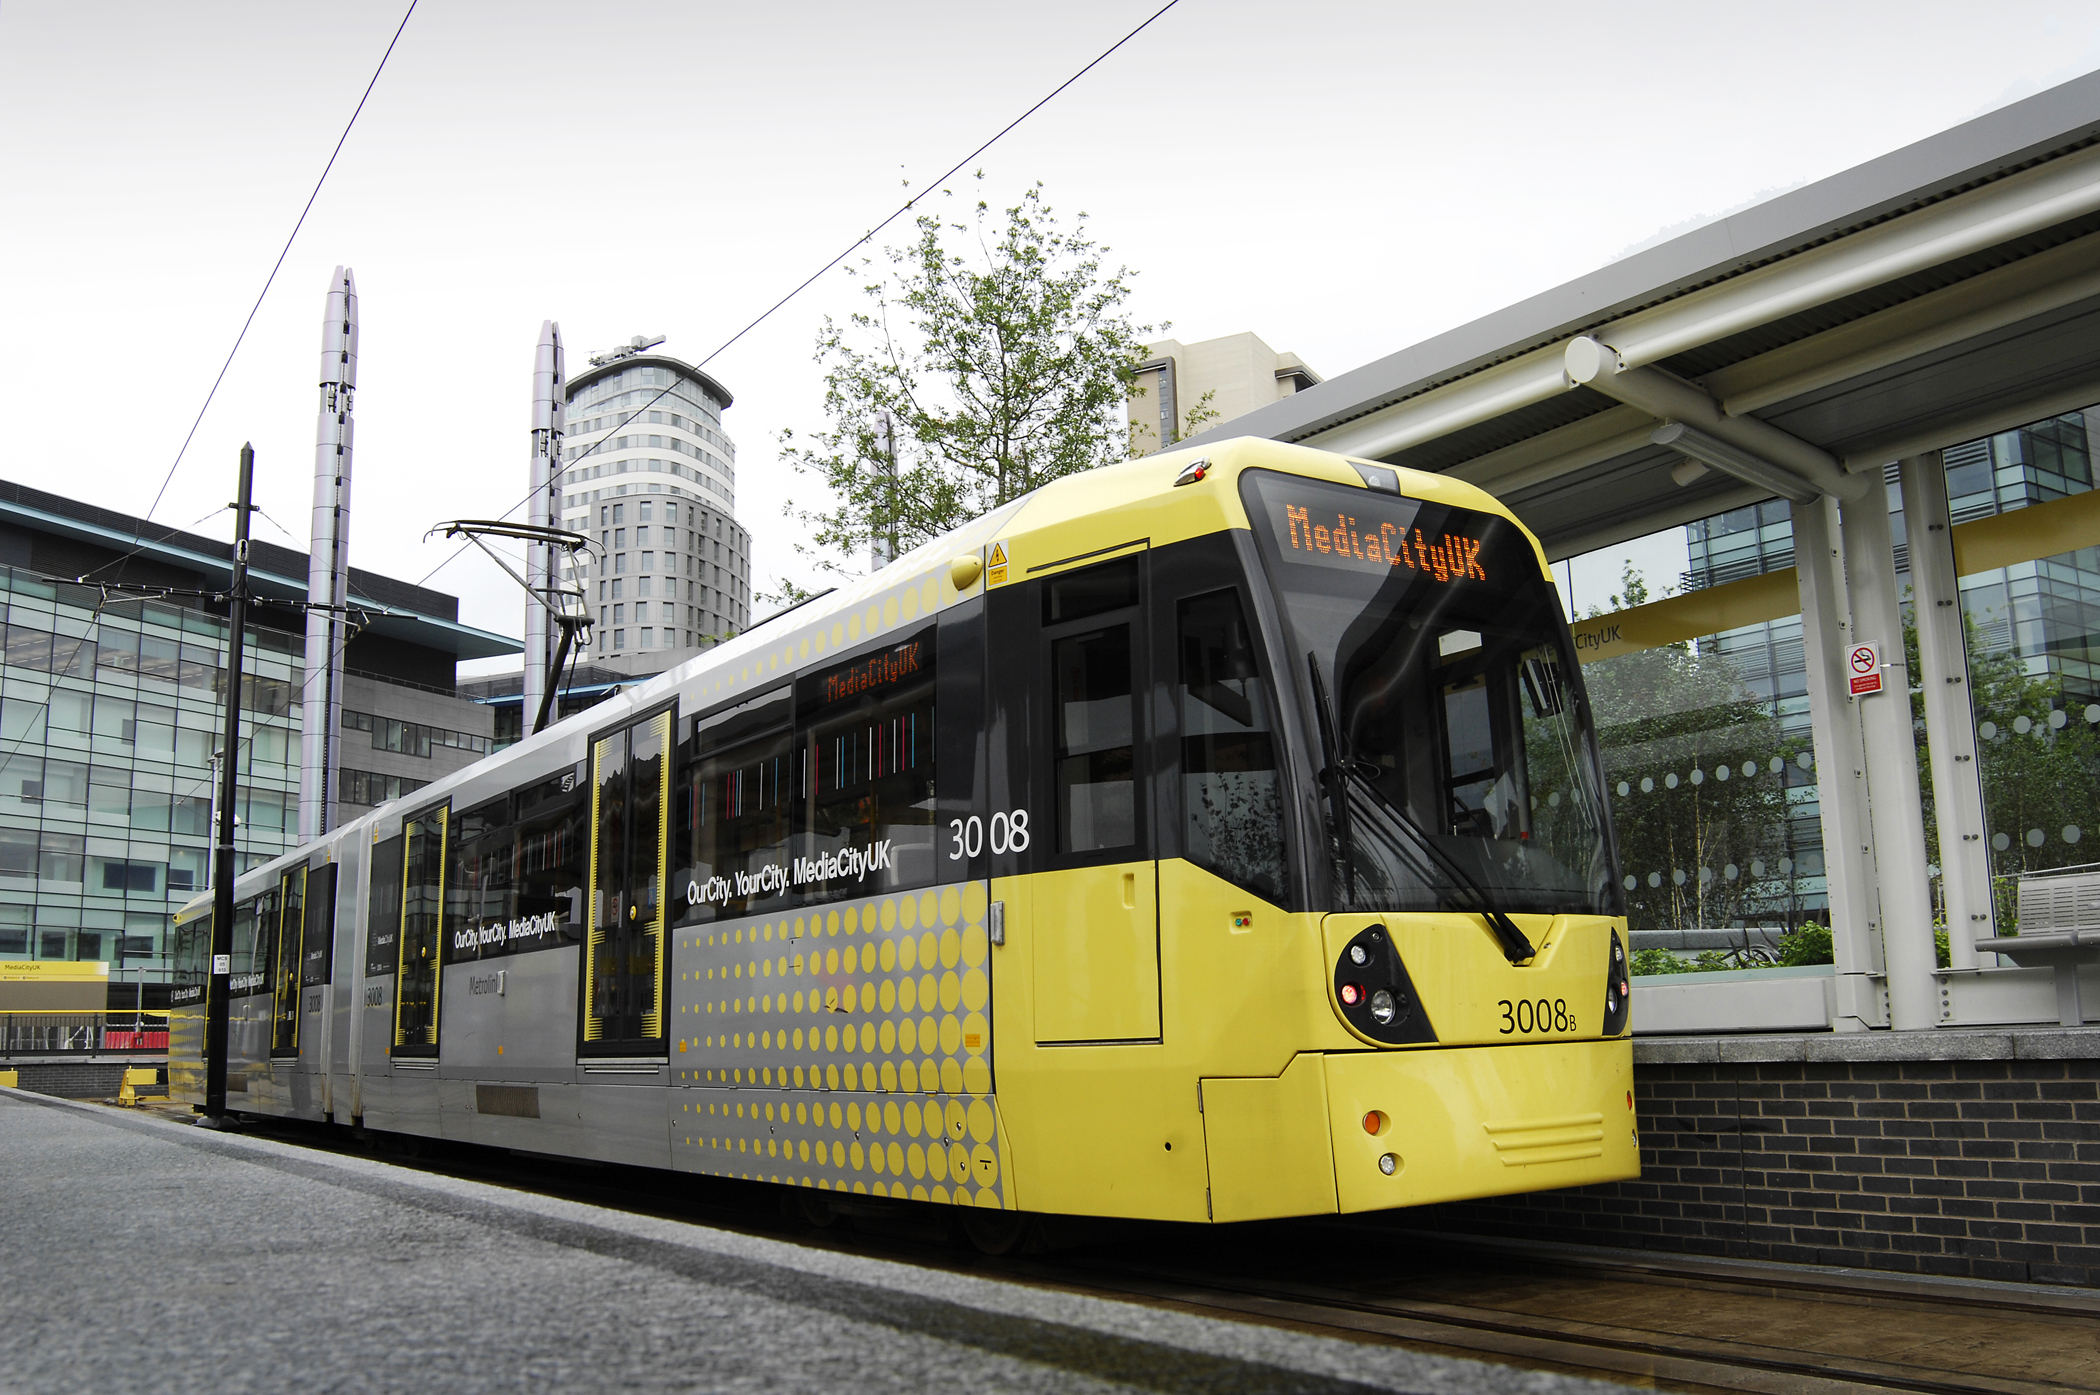 More than £20m will be invested to improve the Metrolink network over the next 12 months